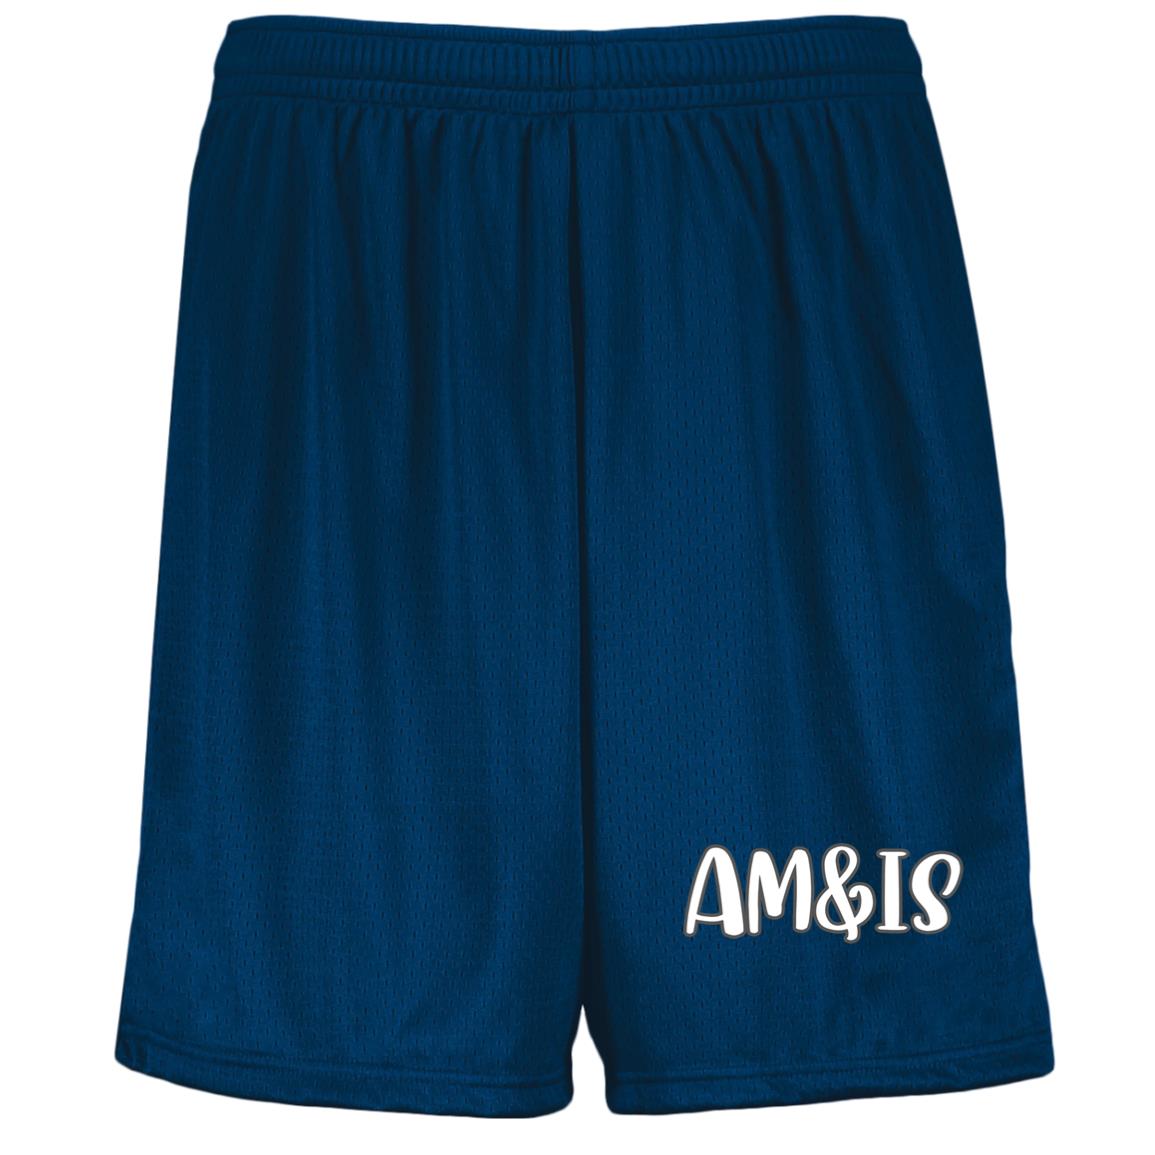 NAVY - AM&IS Activewear Youth Moisture-Wicking Mesh Shorts - kids shorts at TFC&H Co.